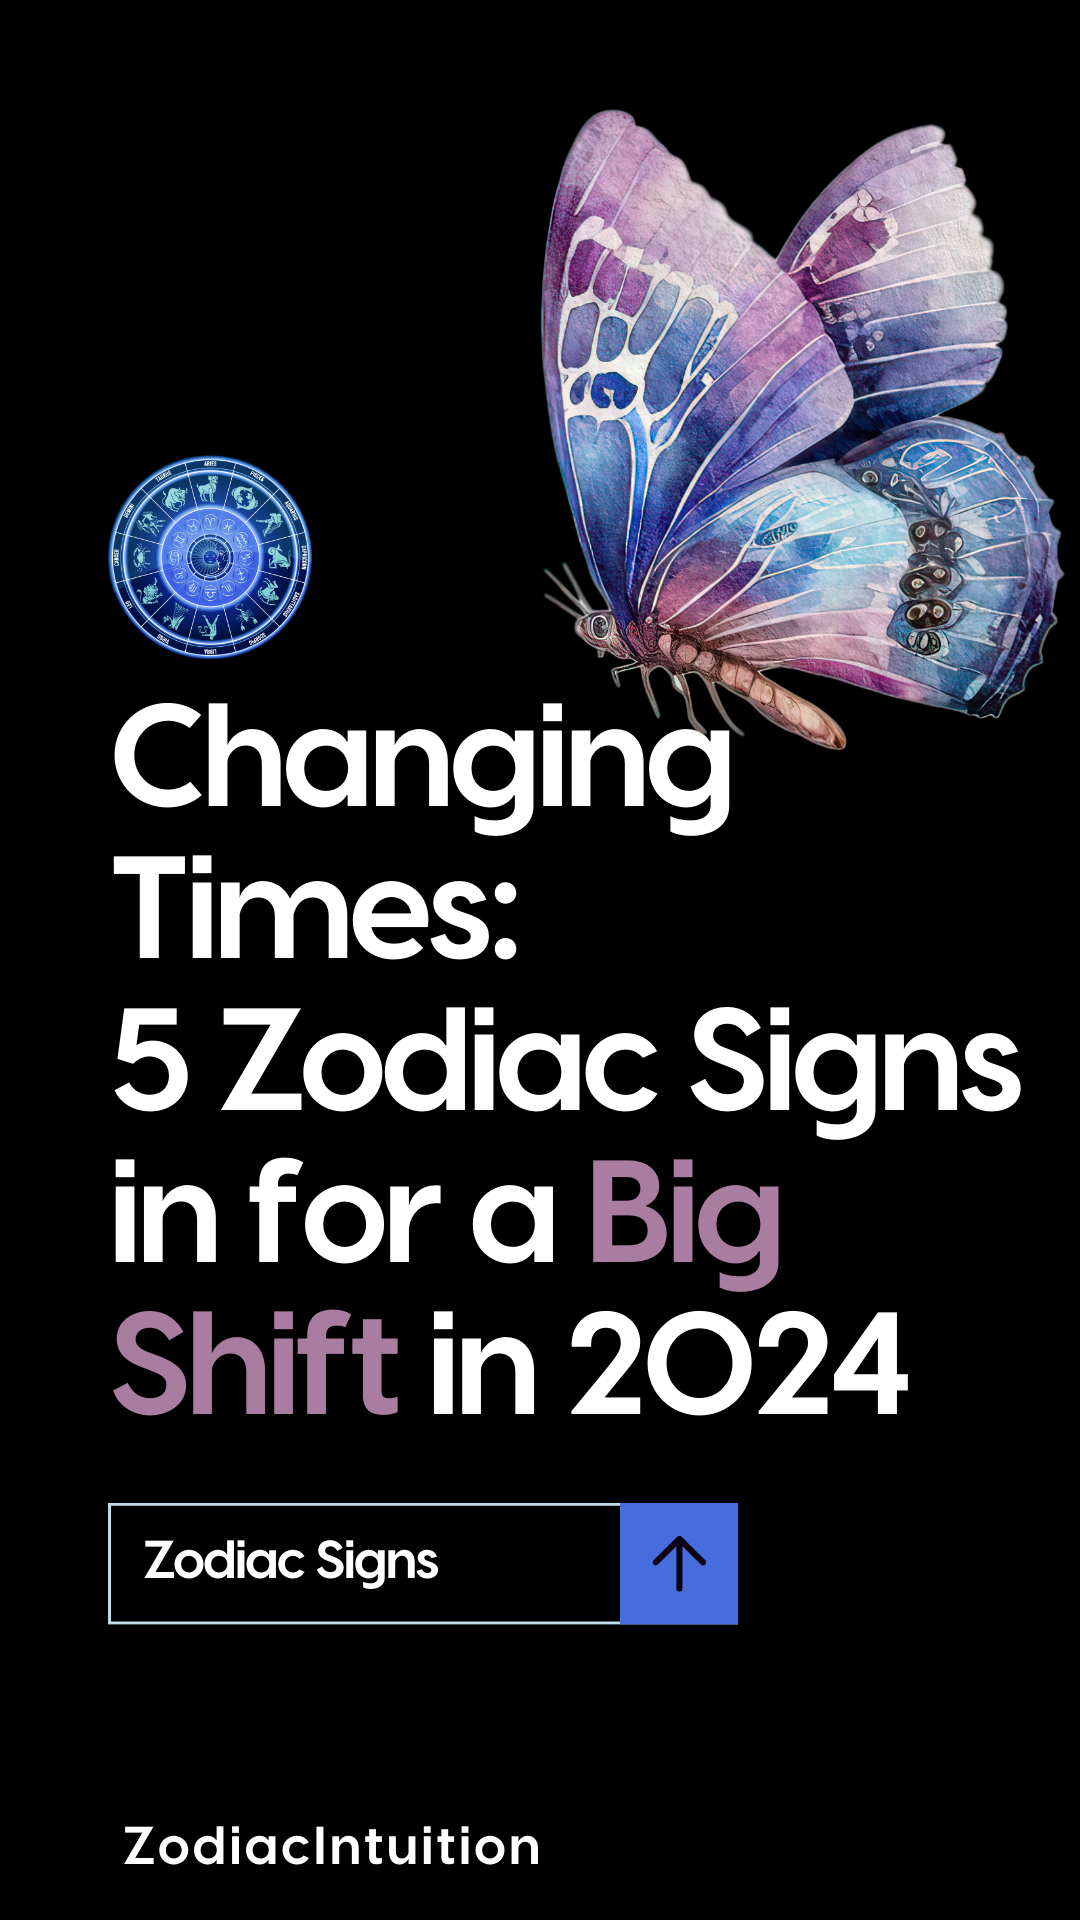 Changing Times: 5 Zodiac Signs in for a Big Shift in 2024